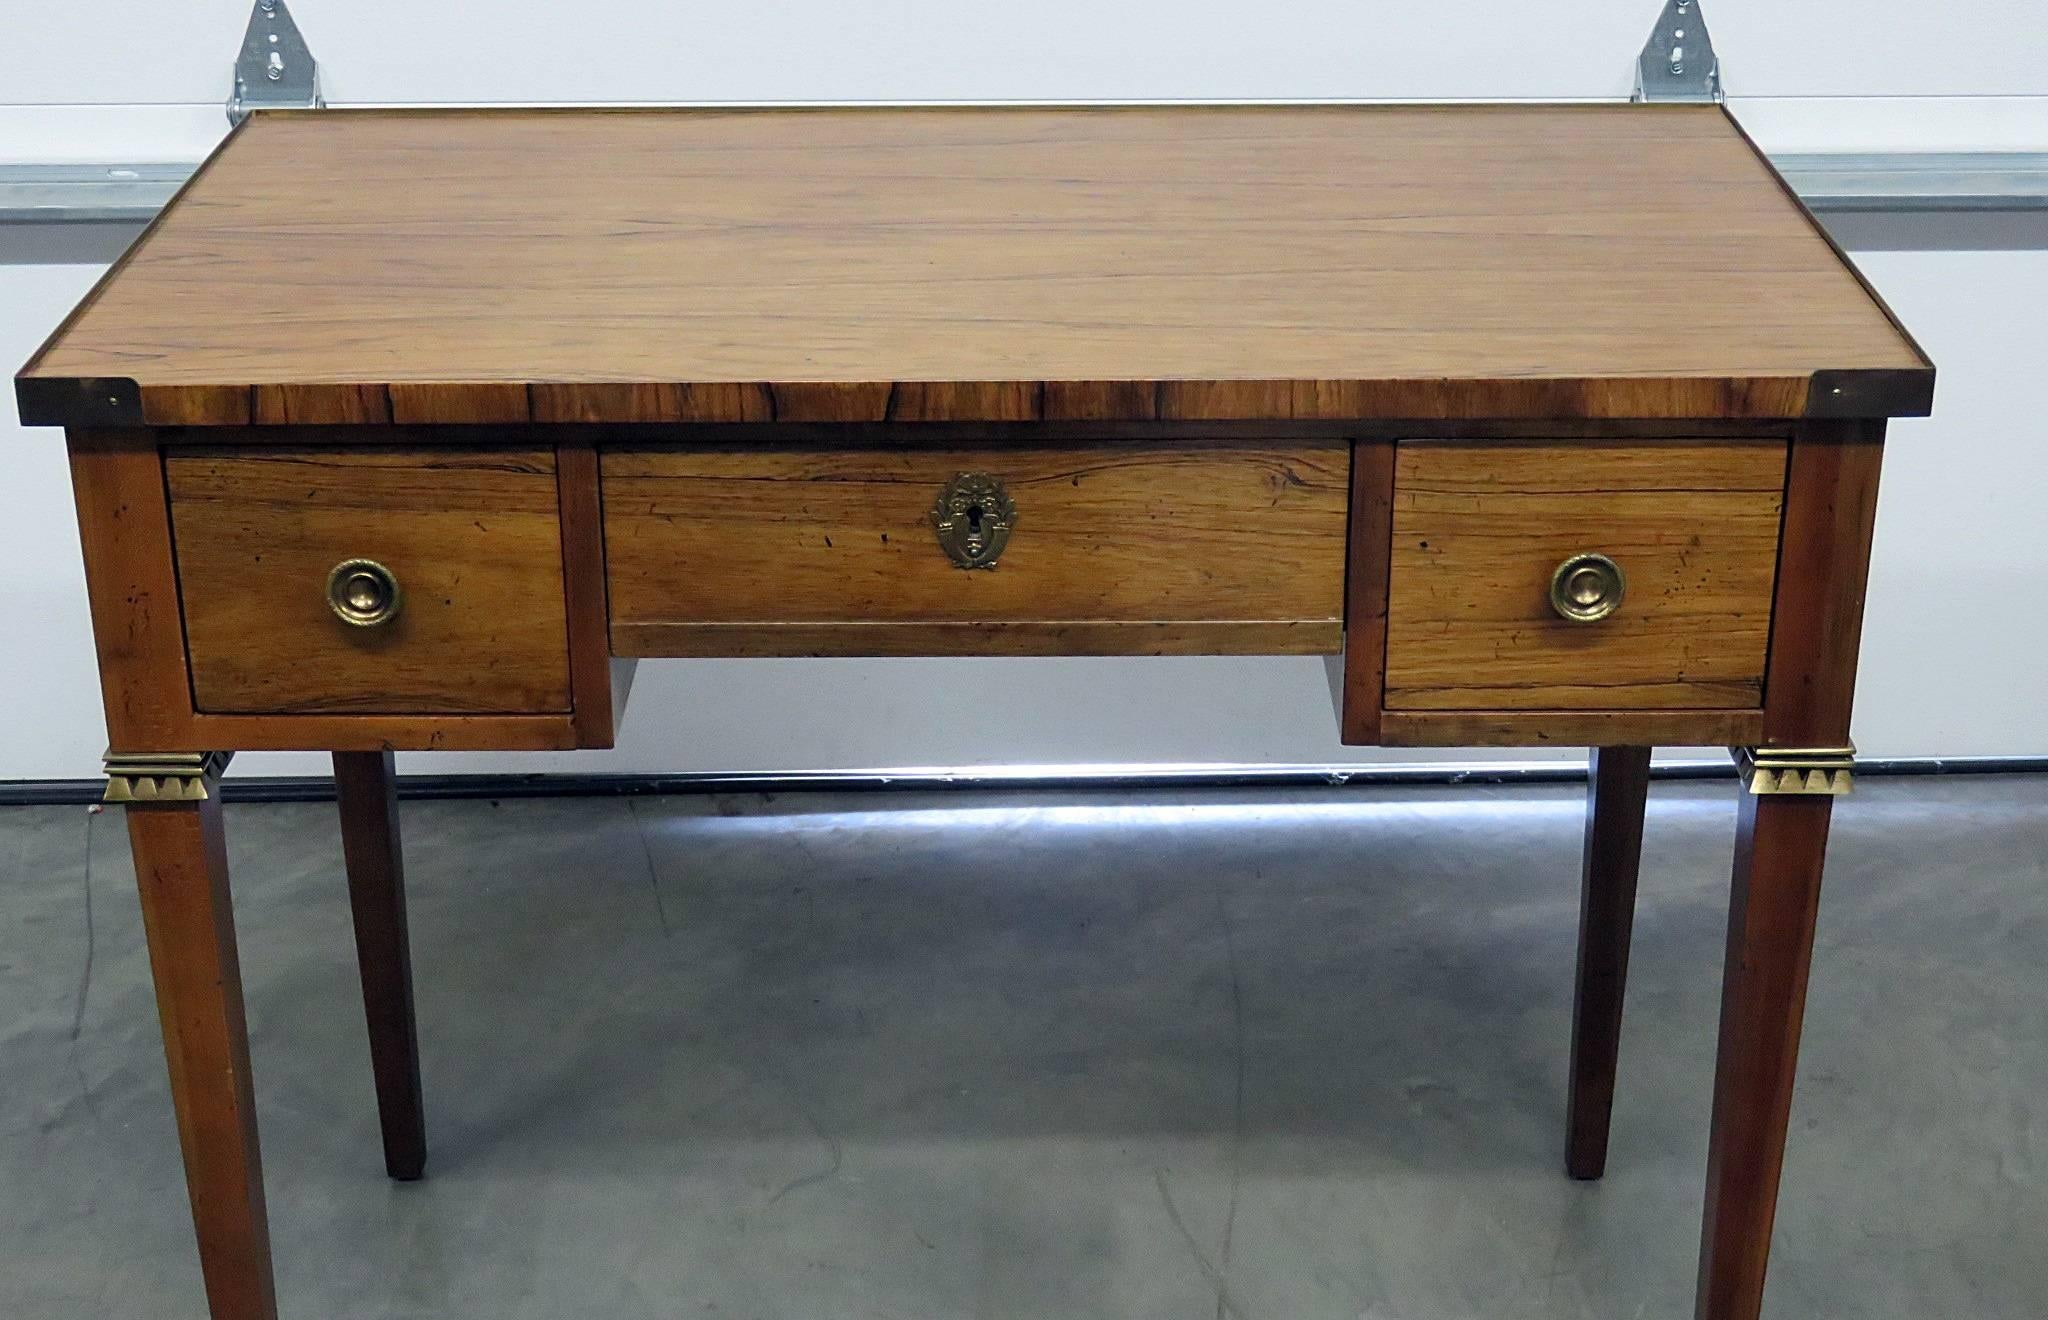 Regency style rosewood desk by Baker. Three drawers with brass accents and trim.